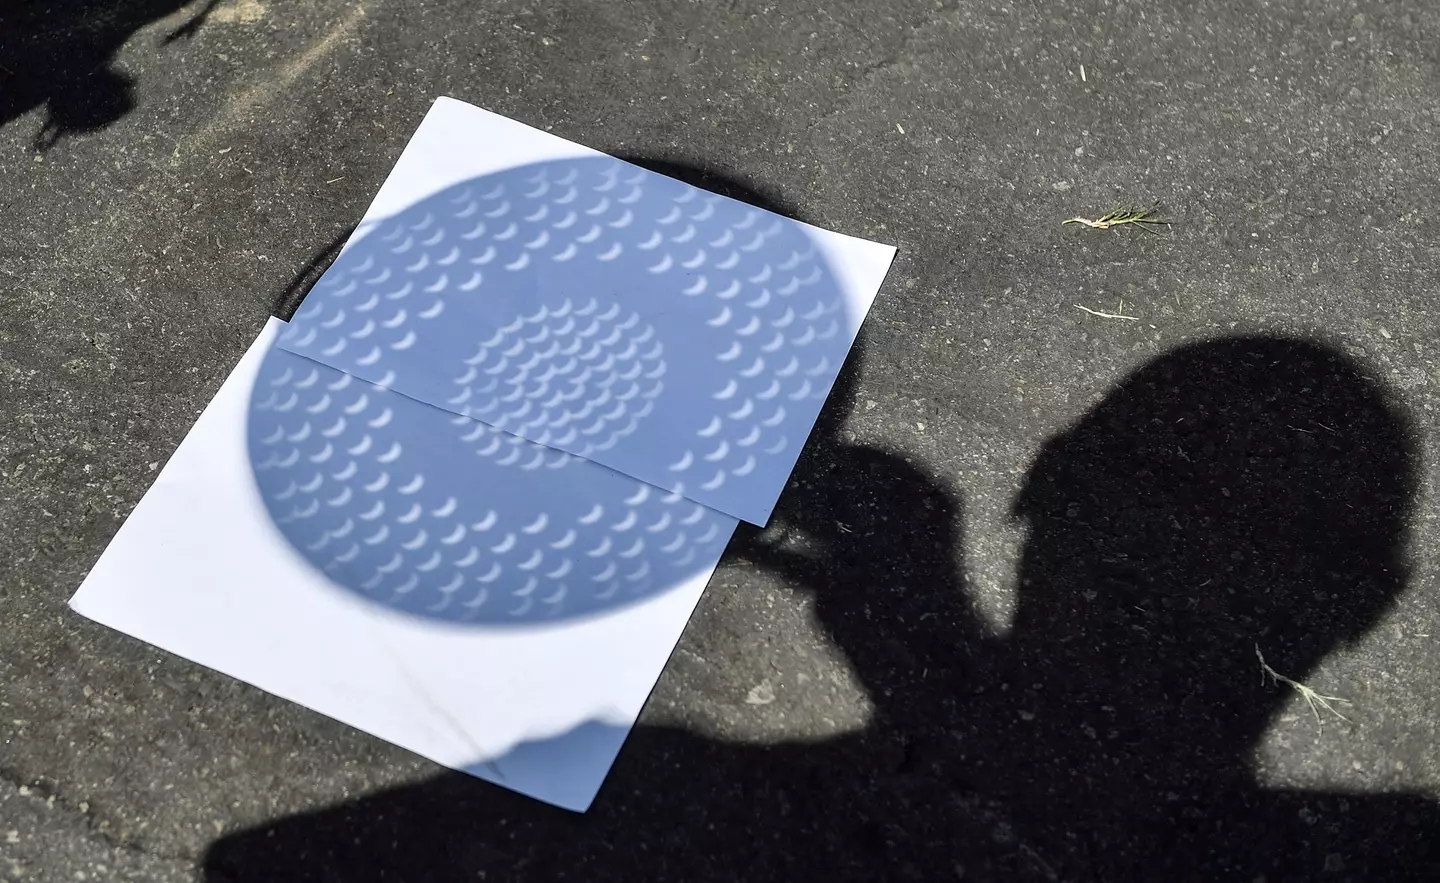 A colander can be used to watch the eclipse. Jeff Gritchen/Digital First Media/Orange County Register via Getty Images